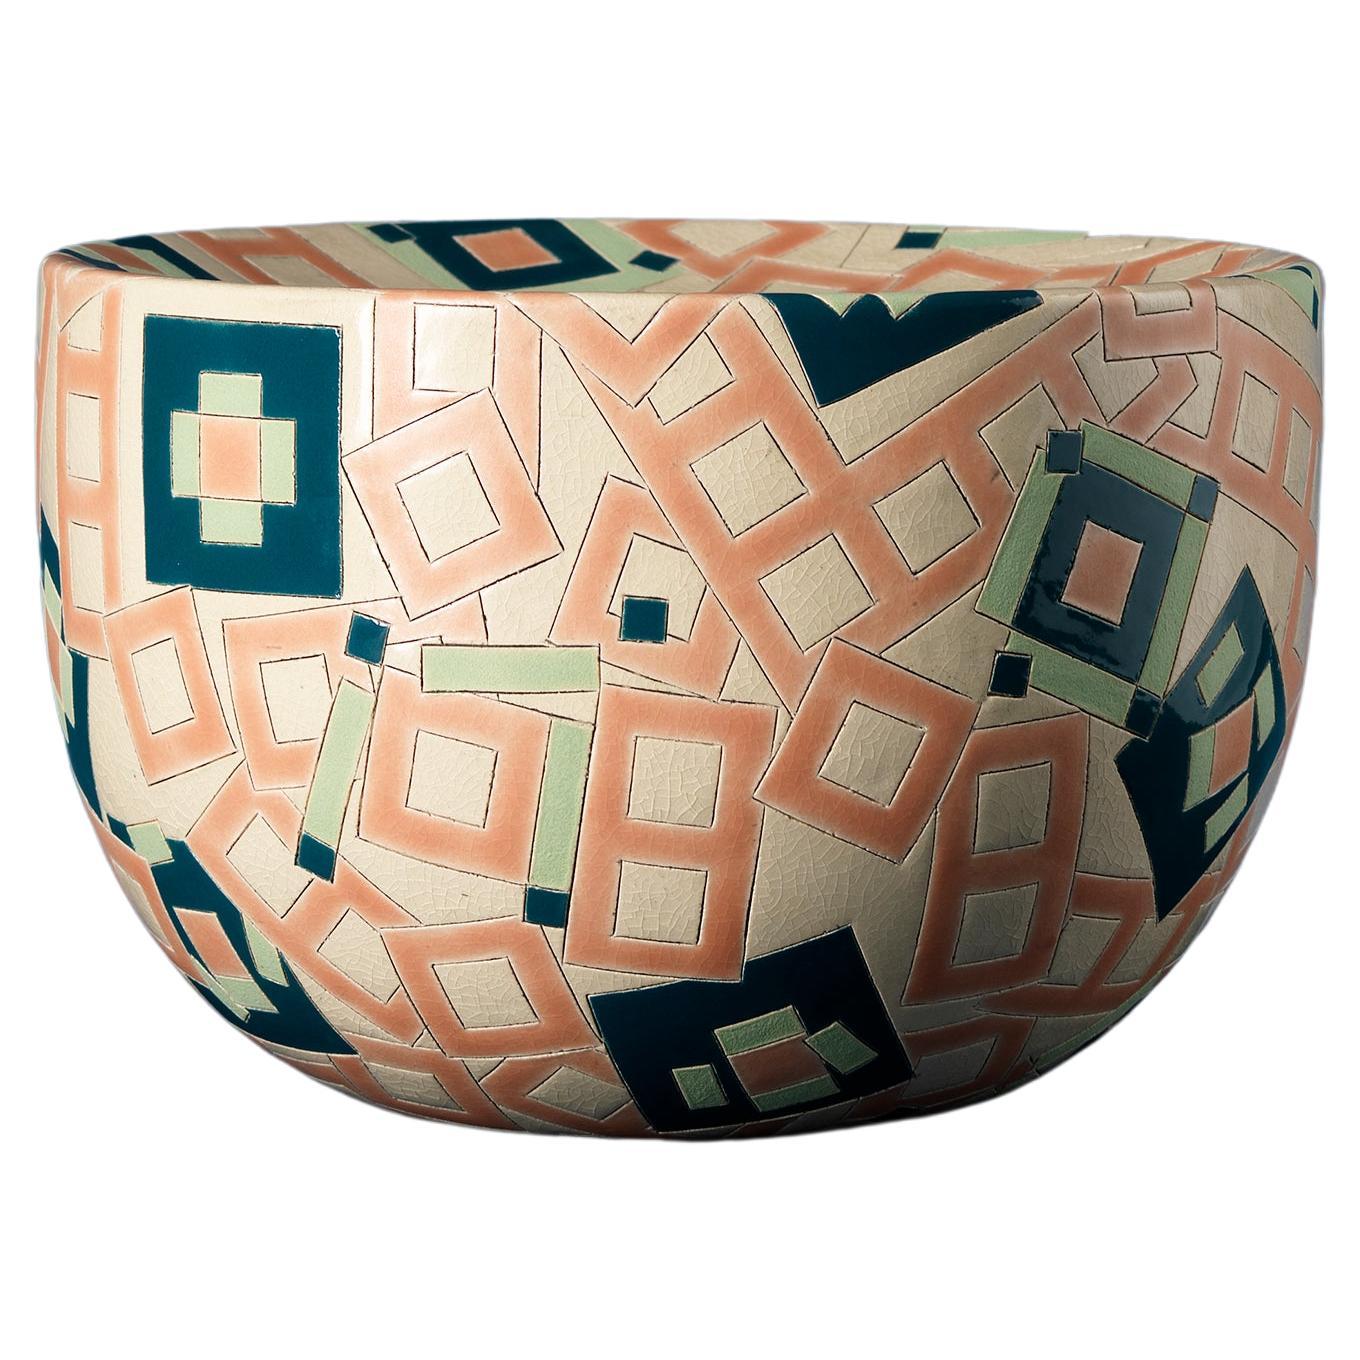 Small Vase Form VII, Inspired by Kirkcaldy Patterns by Frances Priest For Sale